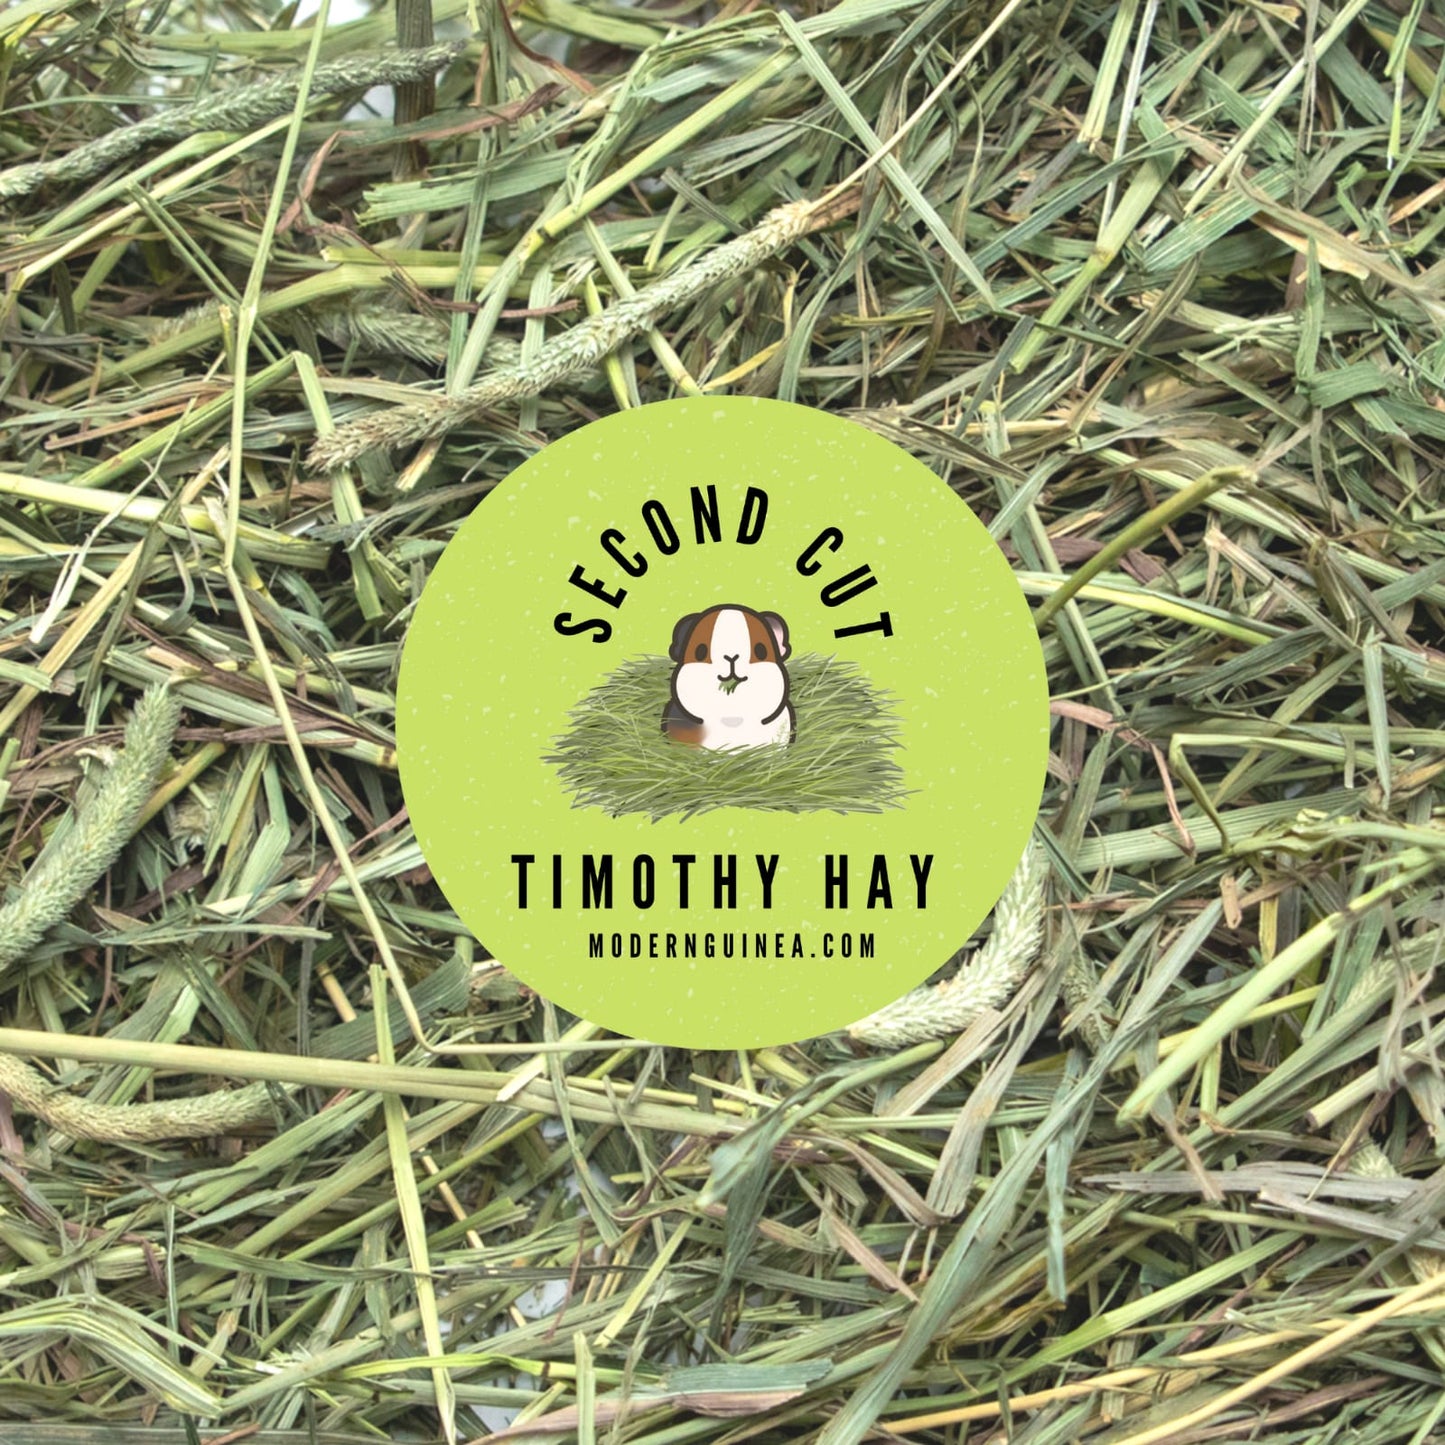 Second-Cut Timothy Hay